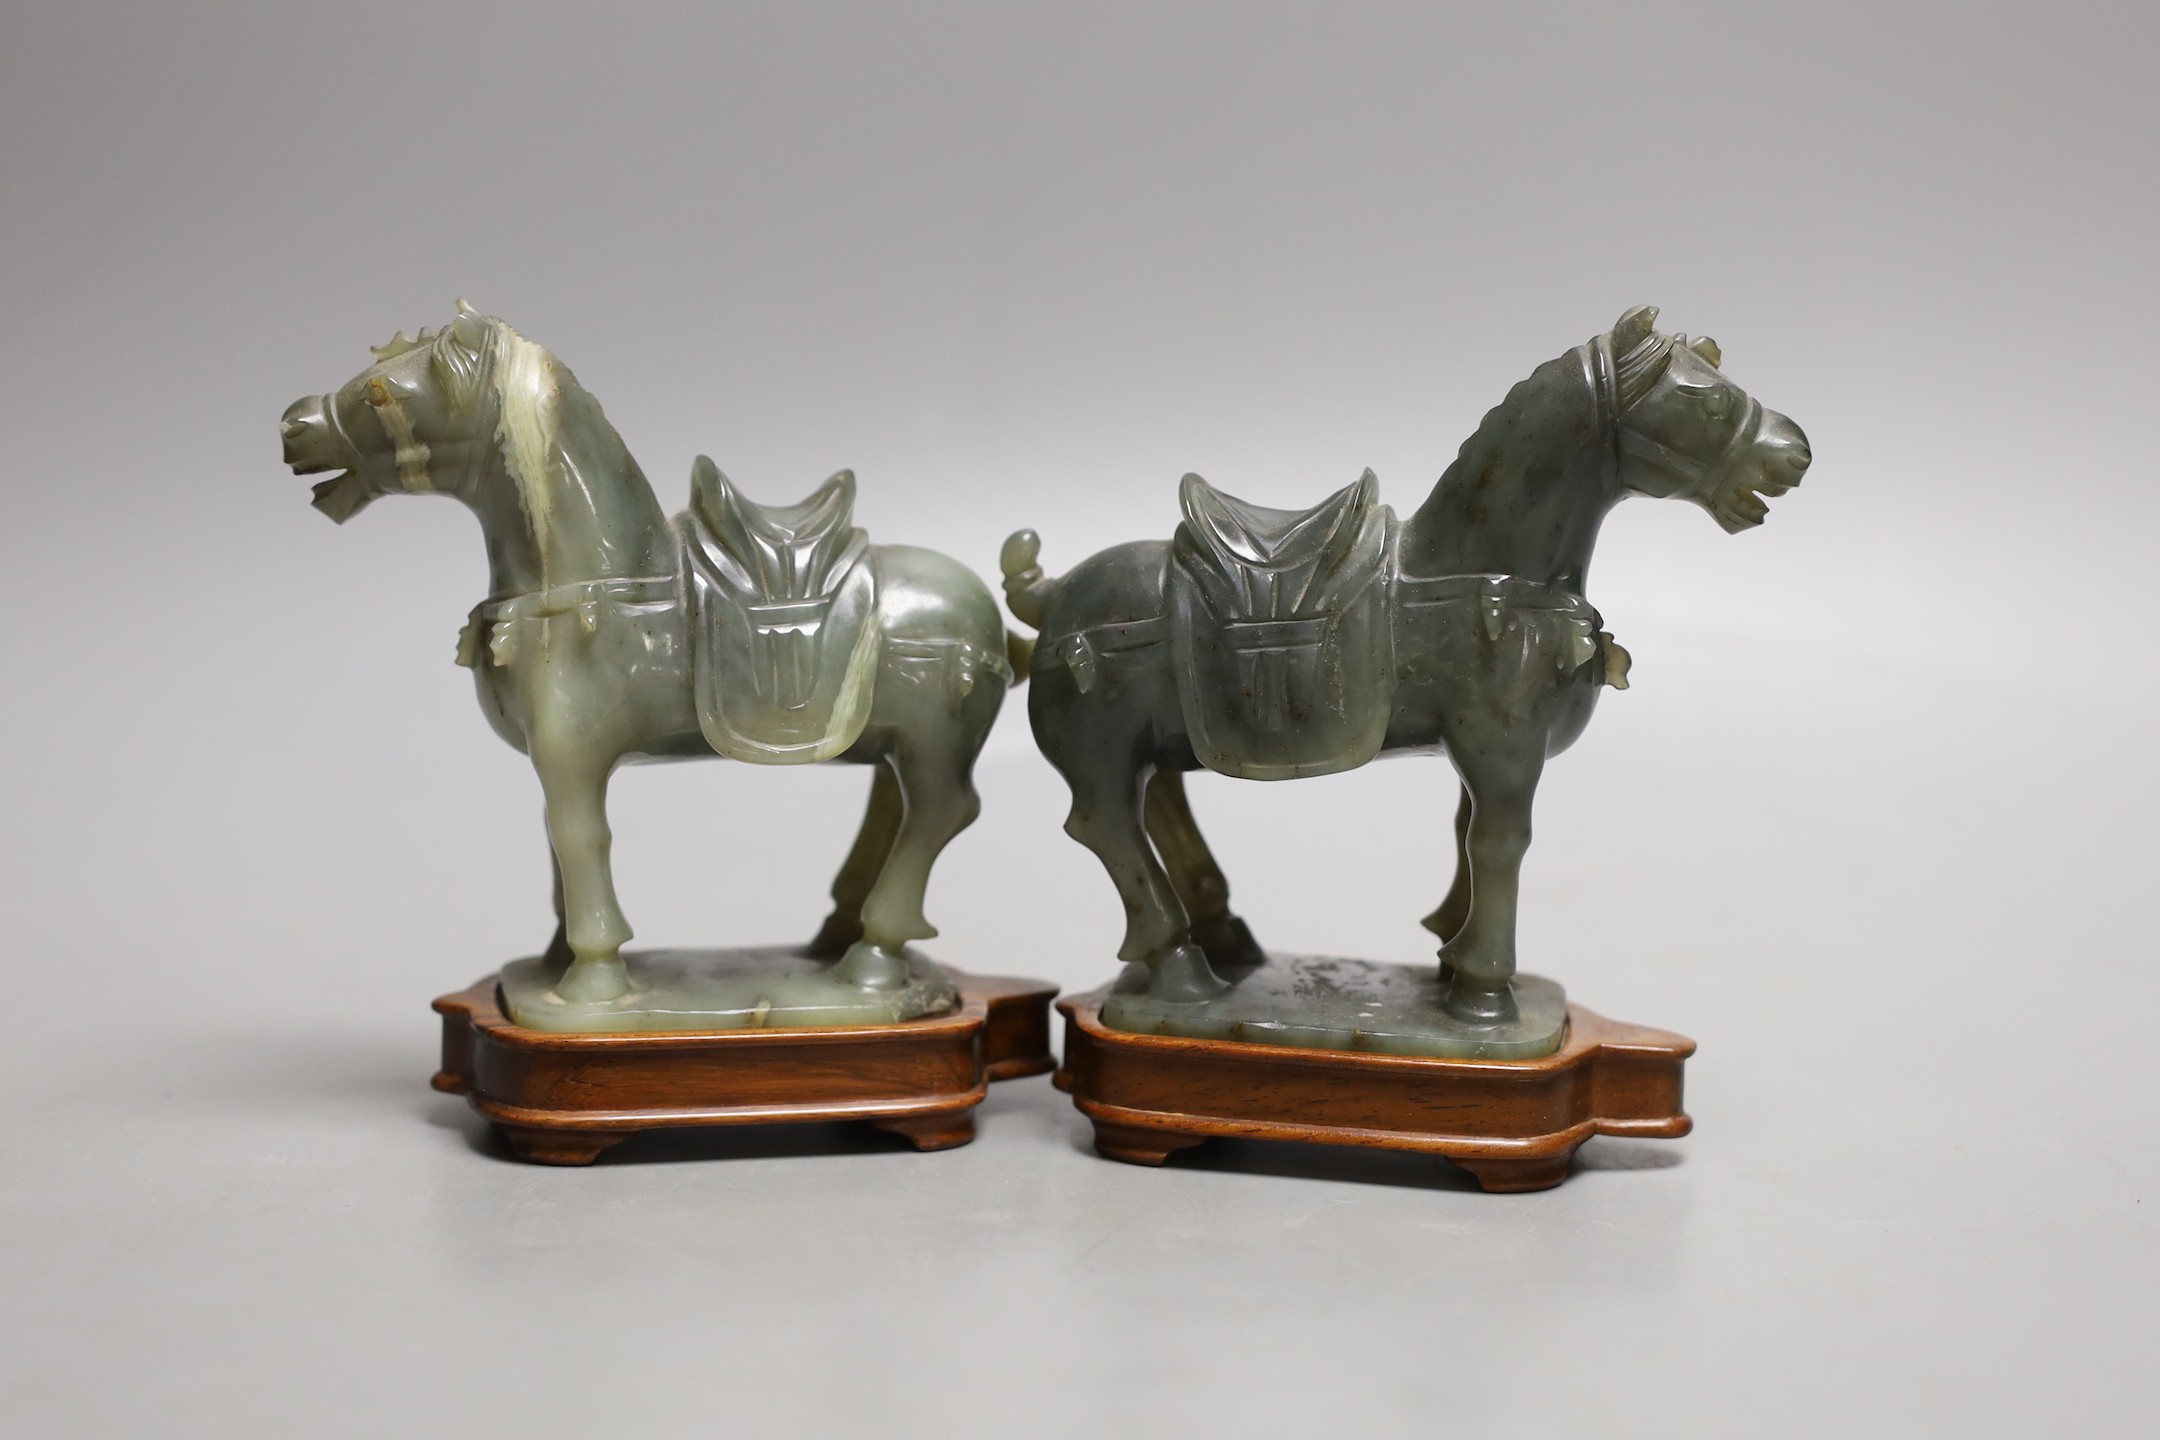 A pair of 20th century Chinese celadon jade figures of horses - 12cm tall